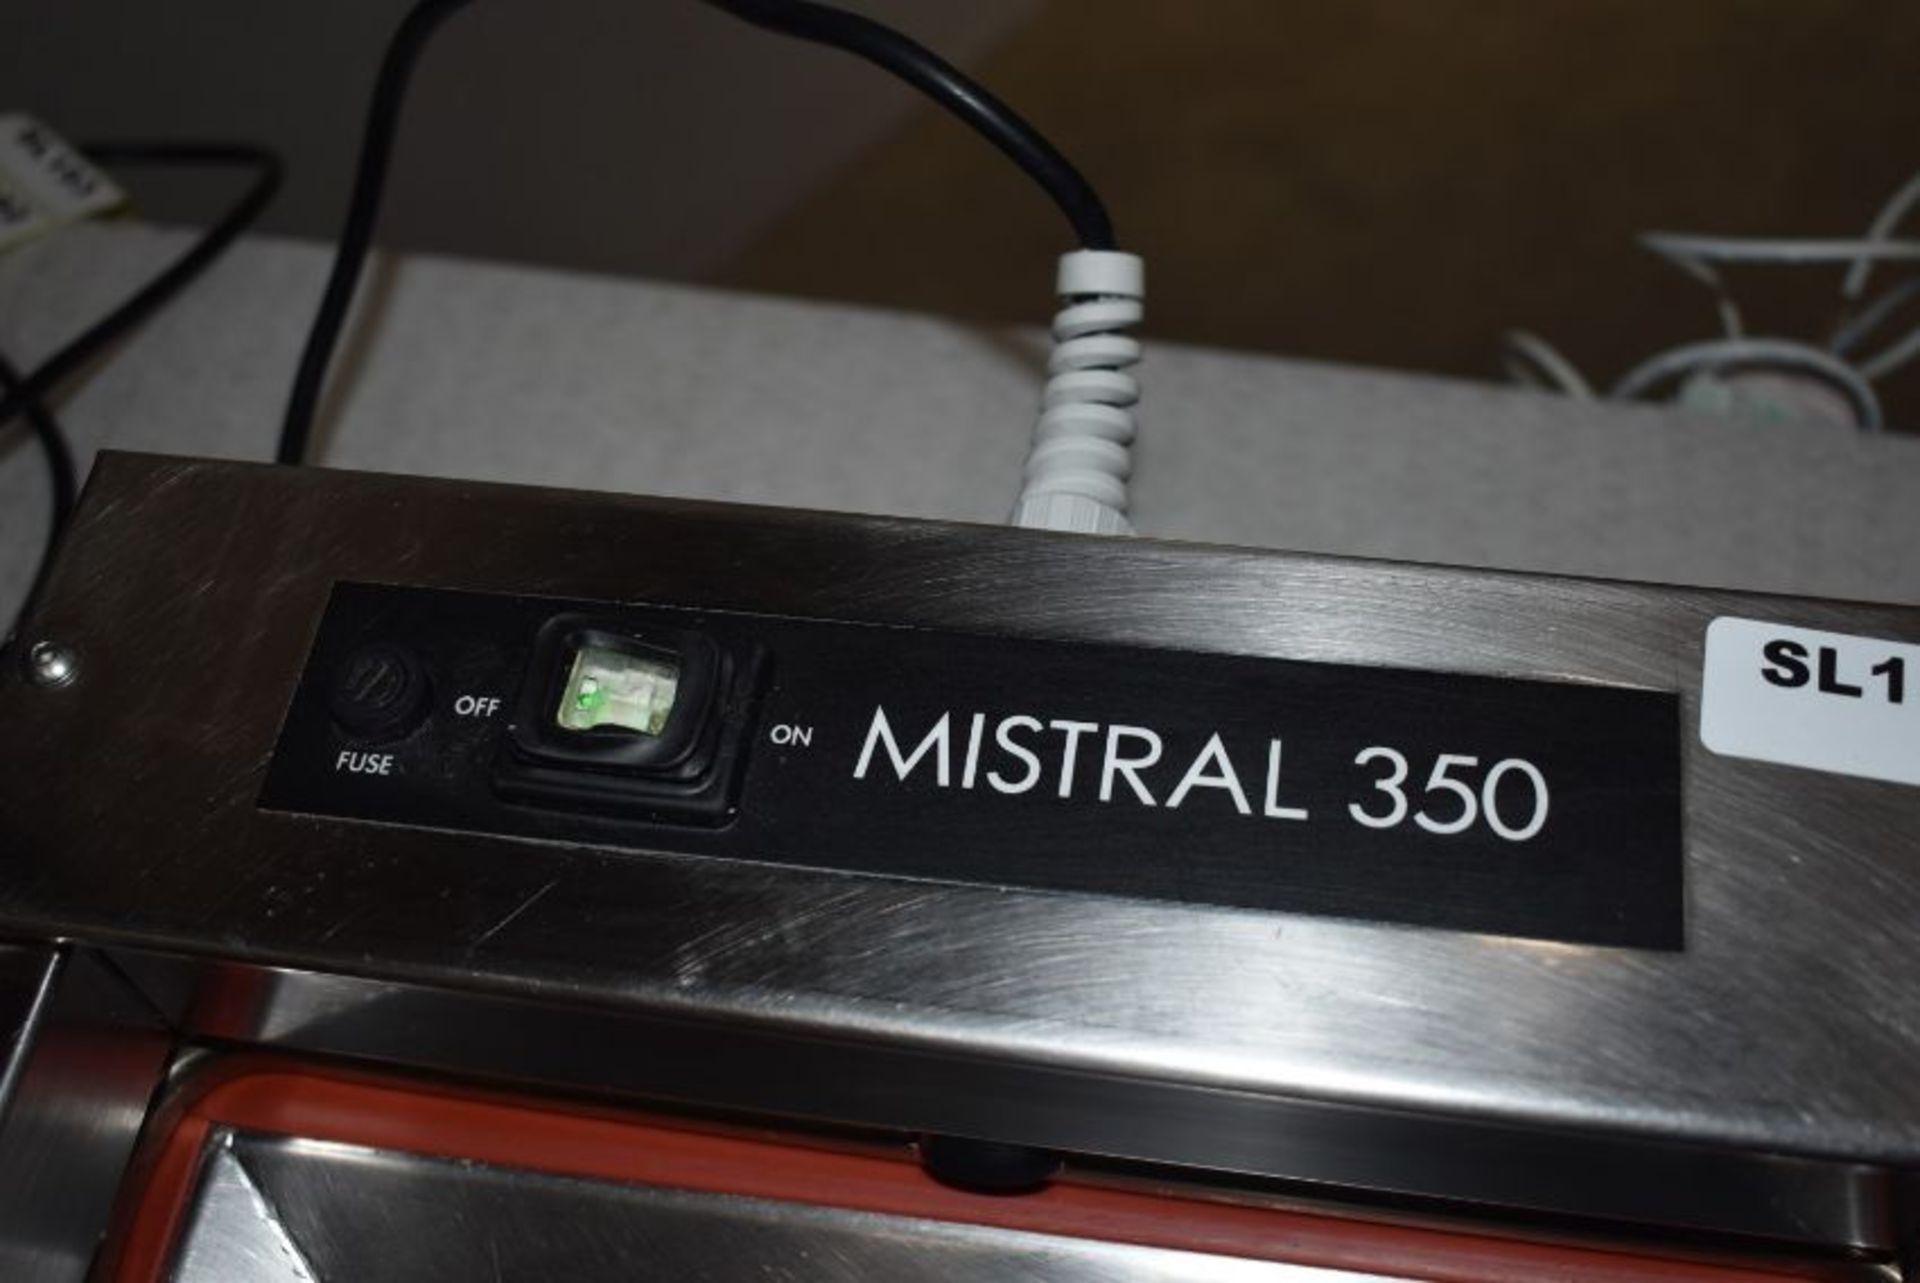 1 x Mistral 350 Heat Sealing Machine For Fish, Meats and More - Recently Removed From a Major - Image 5 of 5